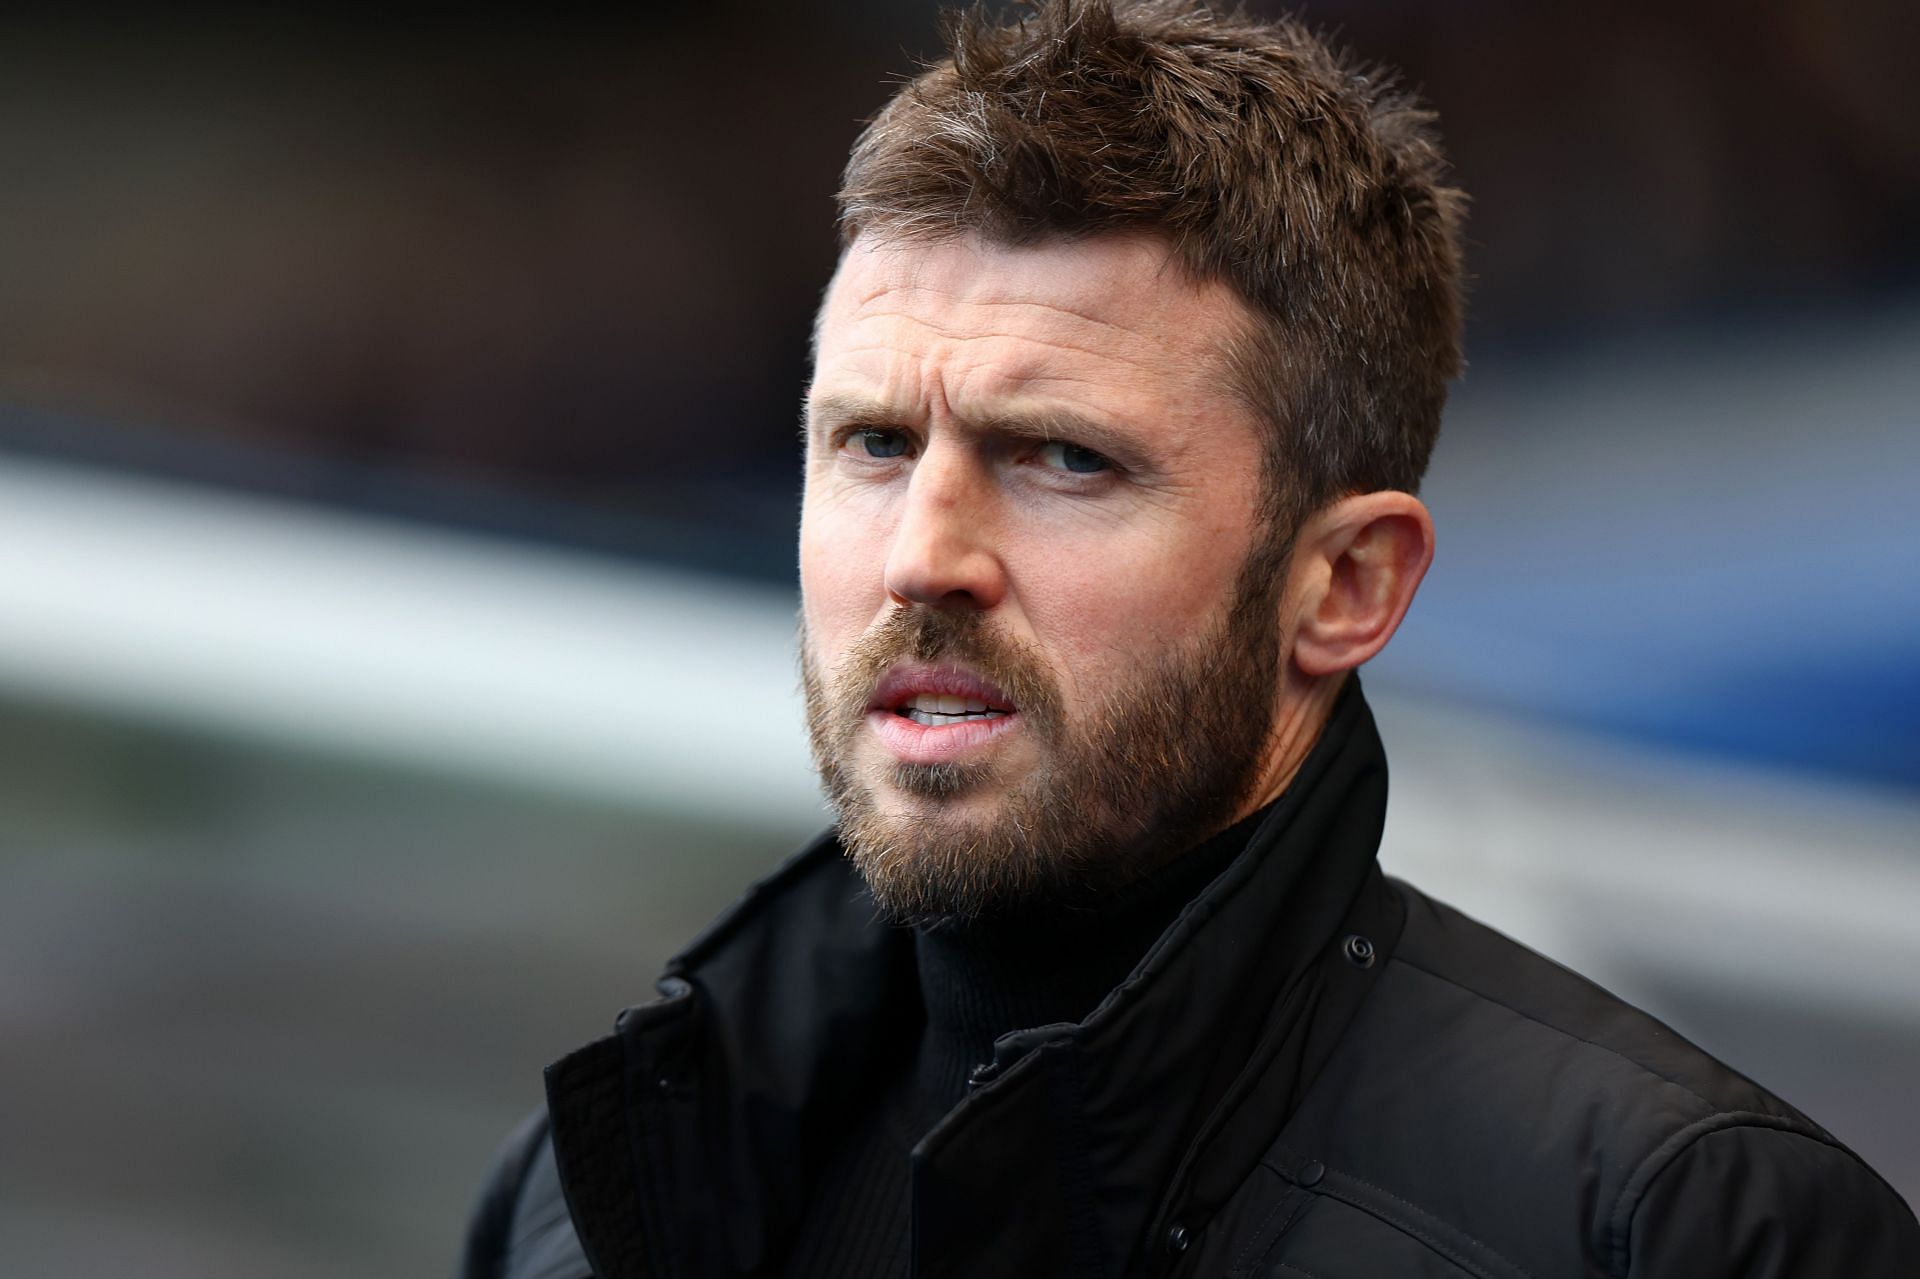 Everton should set their sights on Carrick.